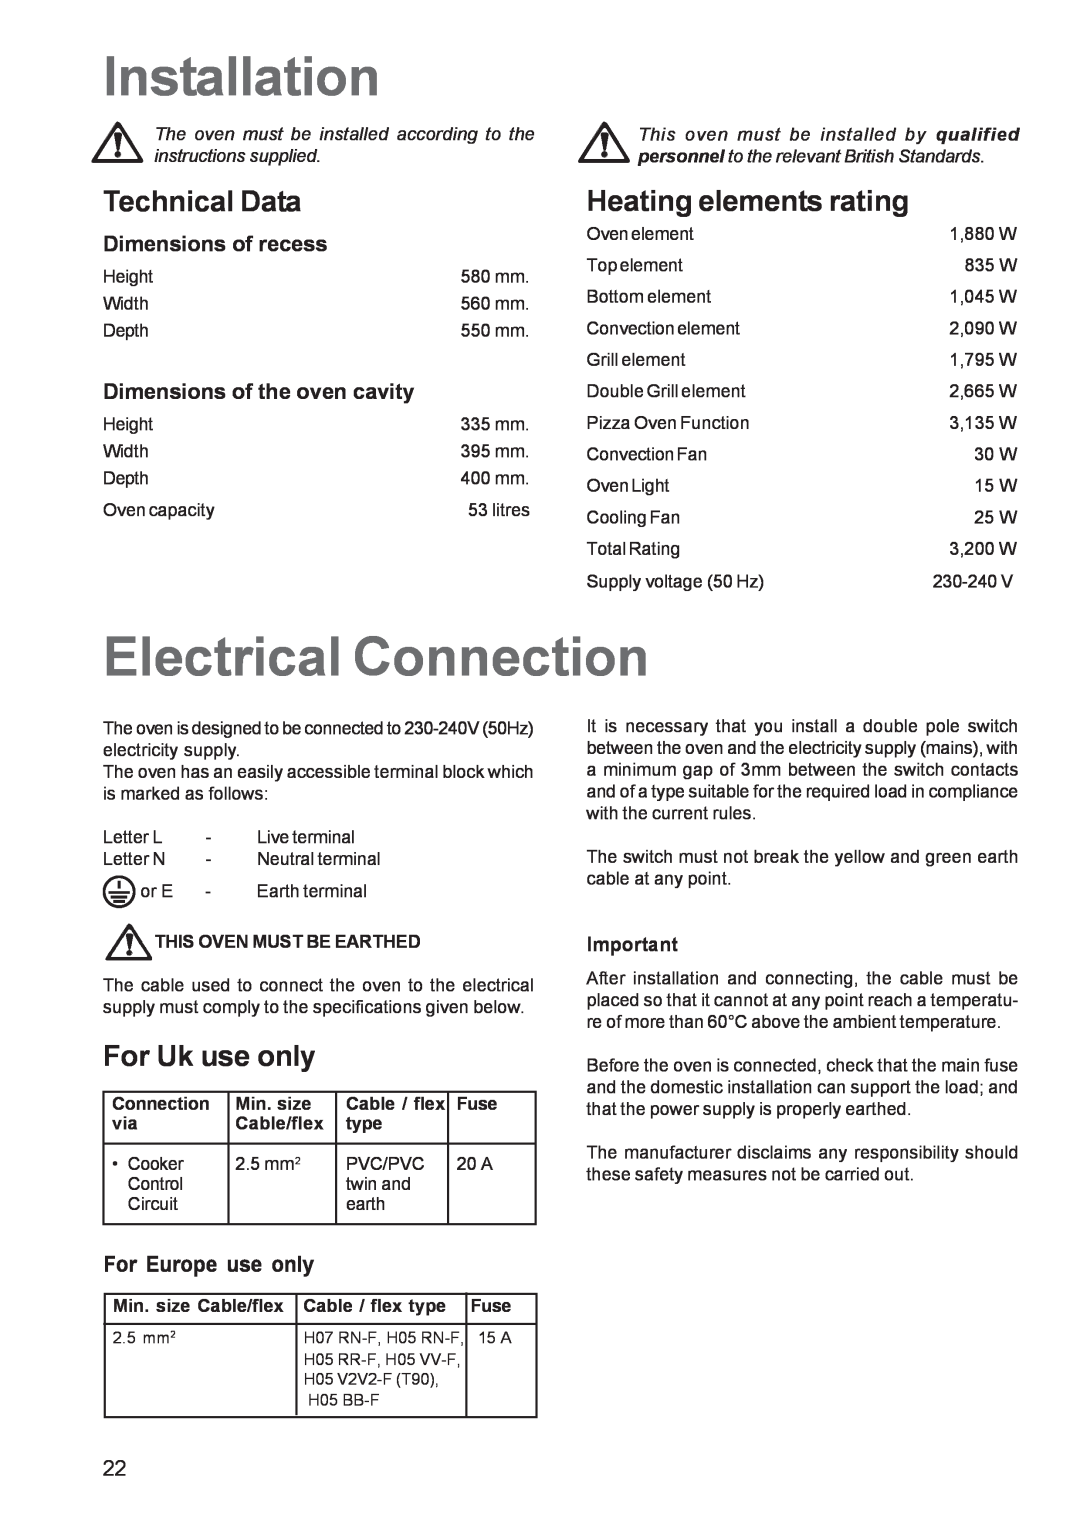 Zanussi ZBS 963 Installation, Electrical Connection, For Uk use only, For Europe use only, Technical Data, Min. size, Fuse 